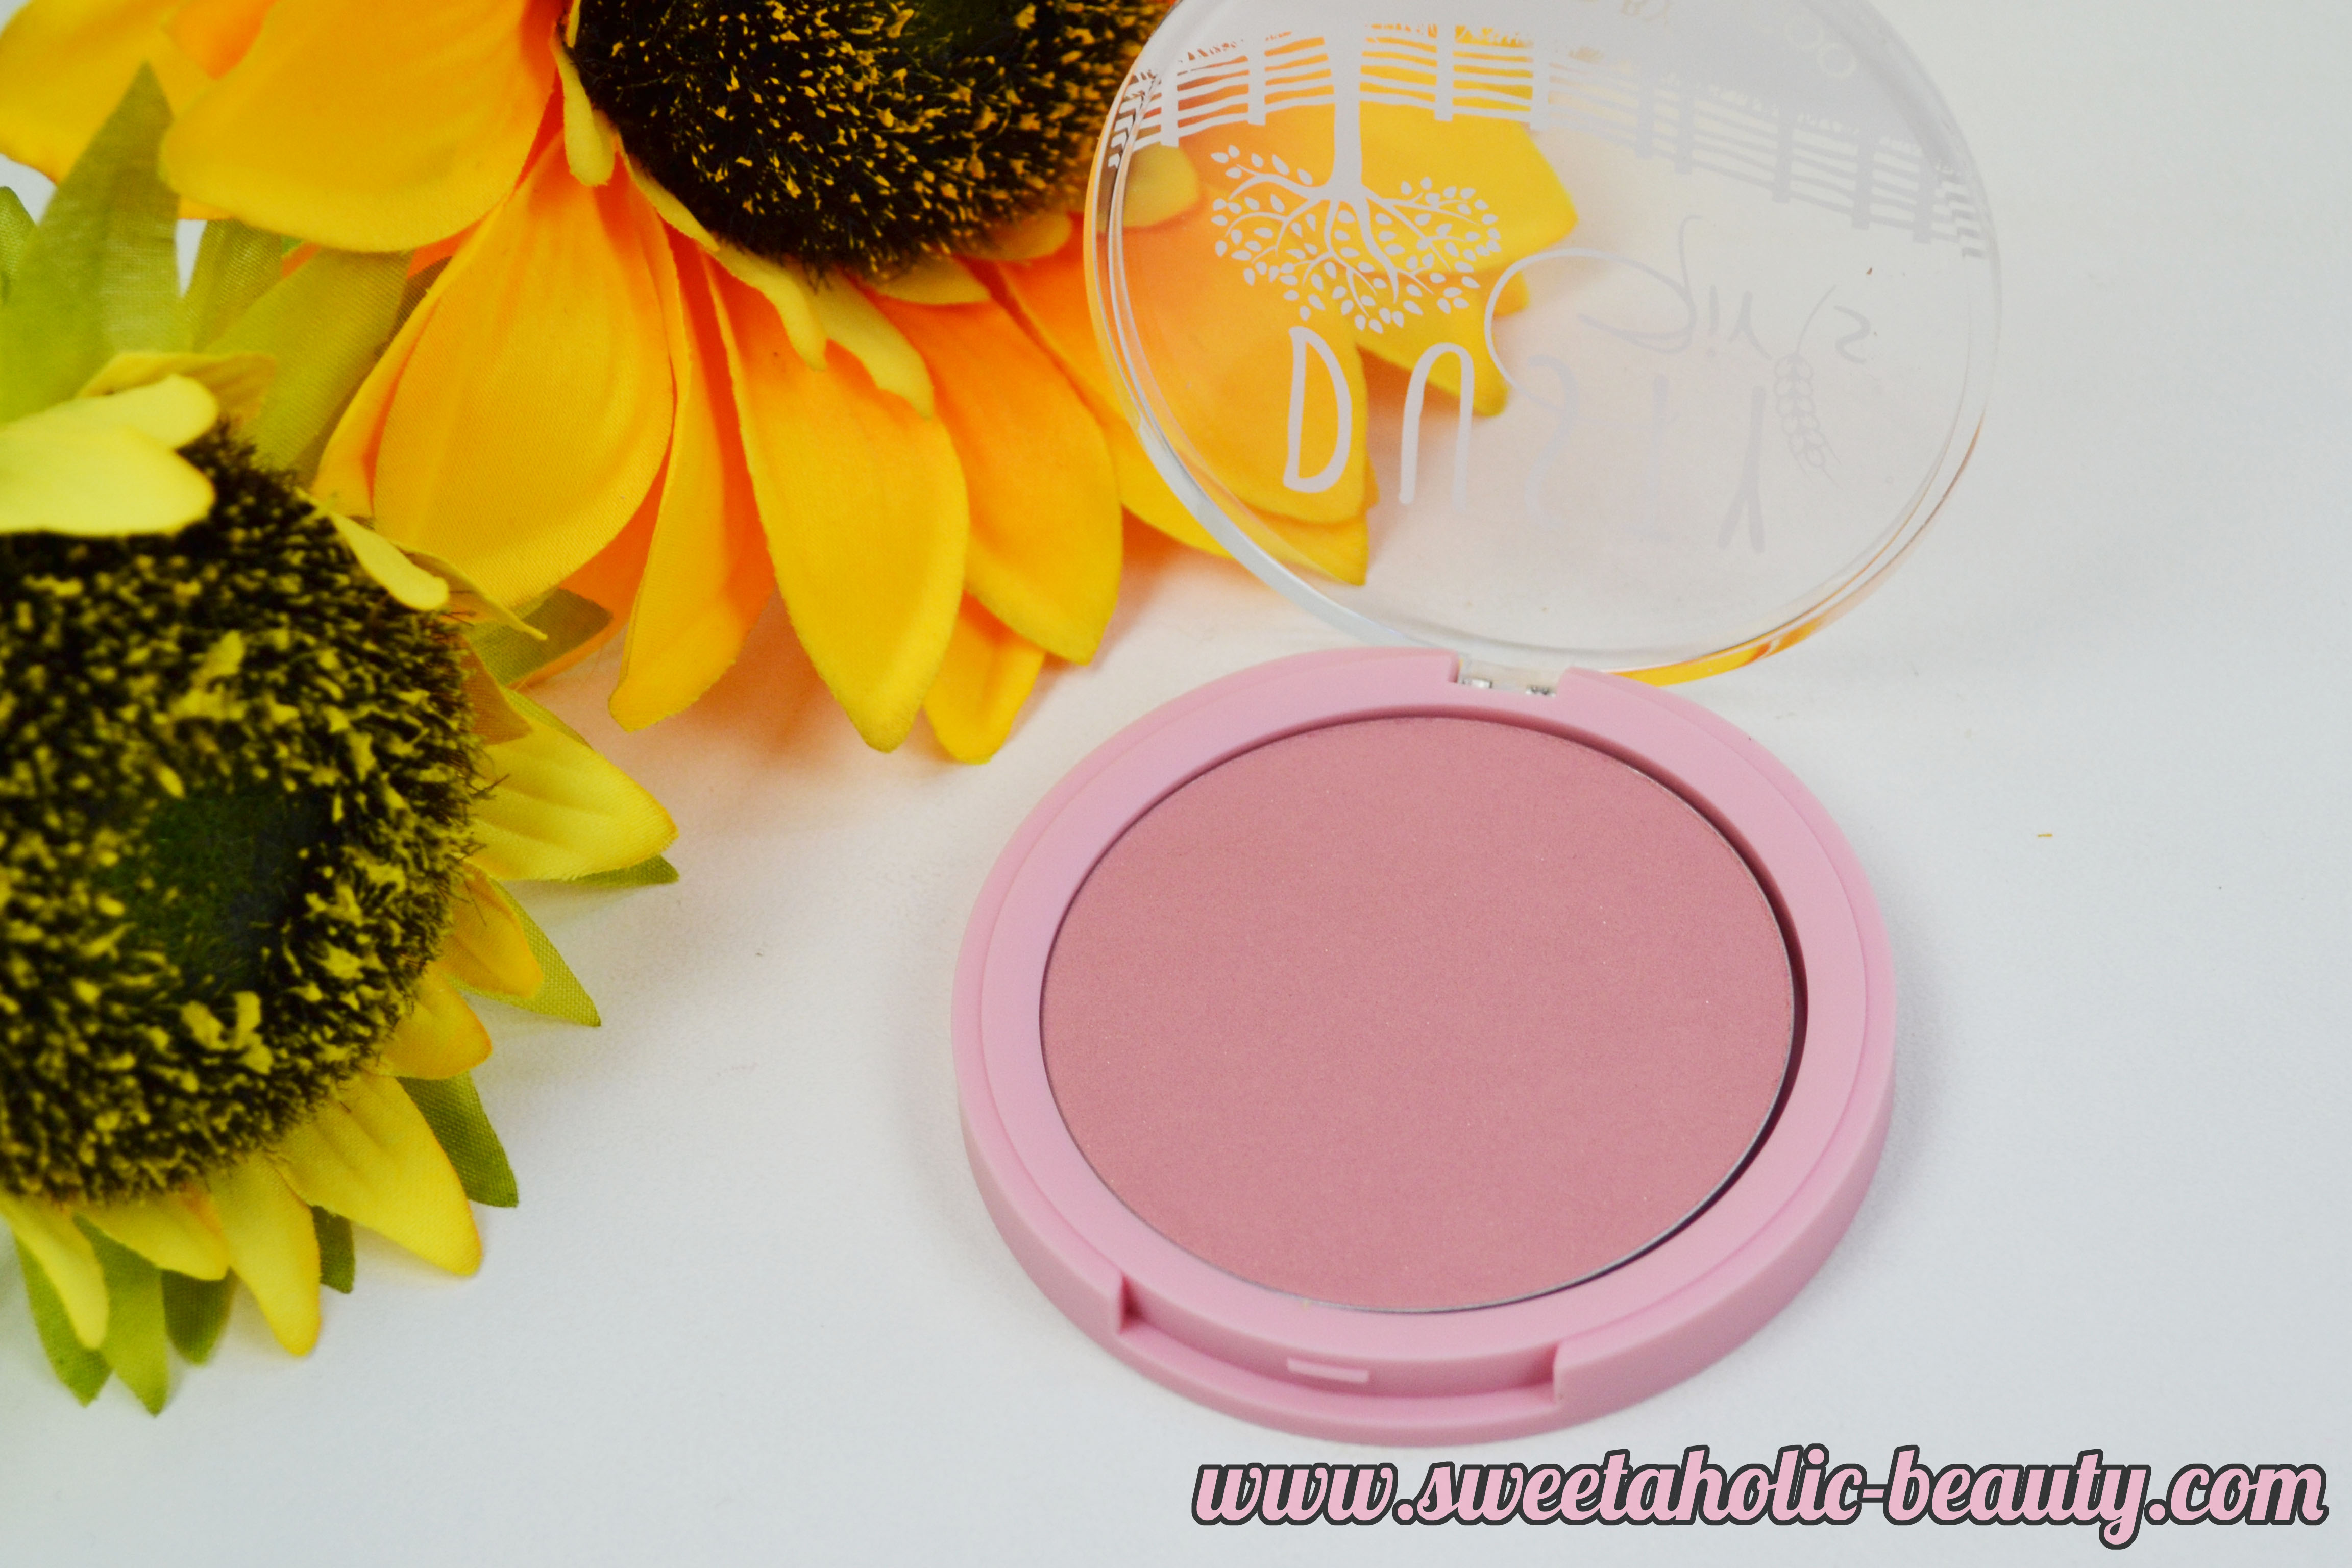 Dusty Girls Complexion Products Review & Swatches - Sweetaholic Beauty